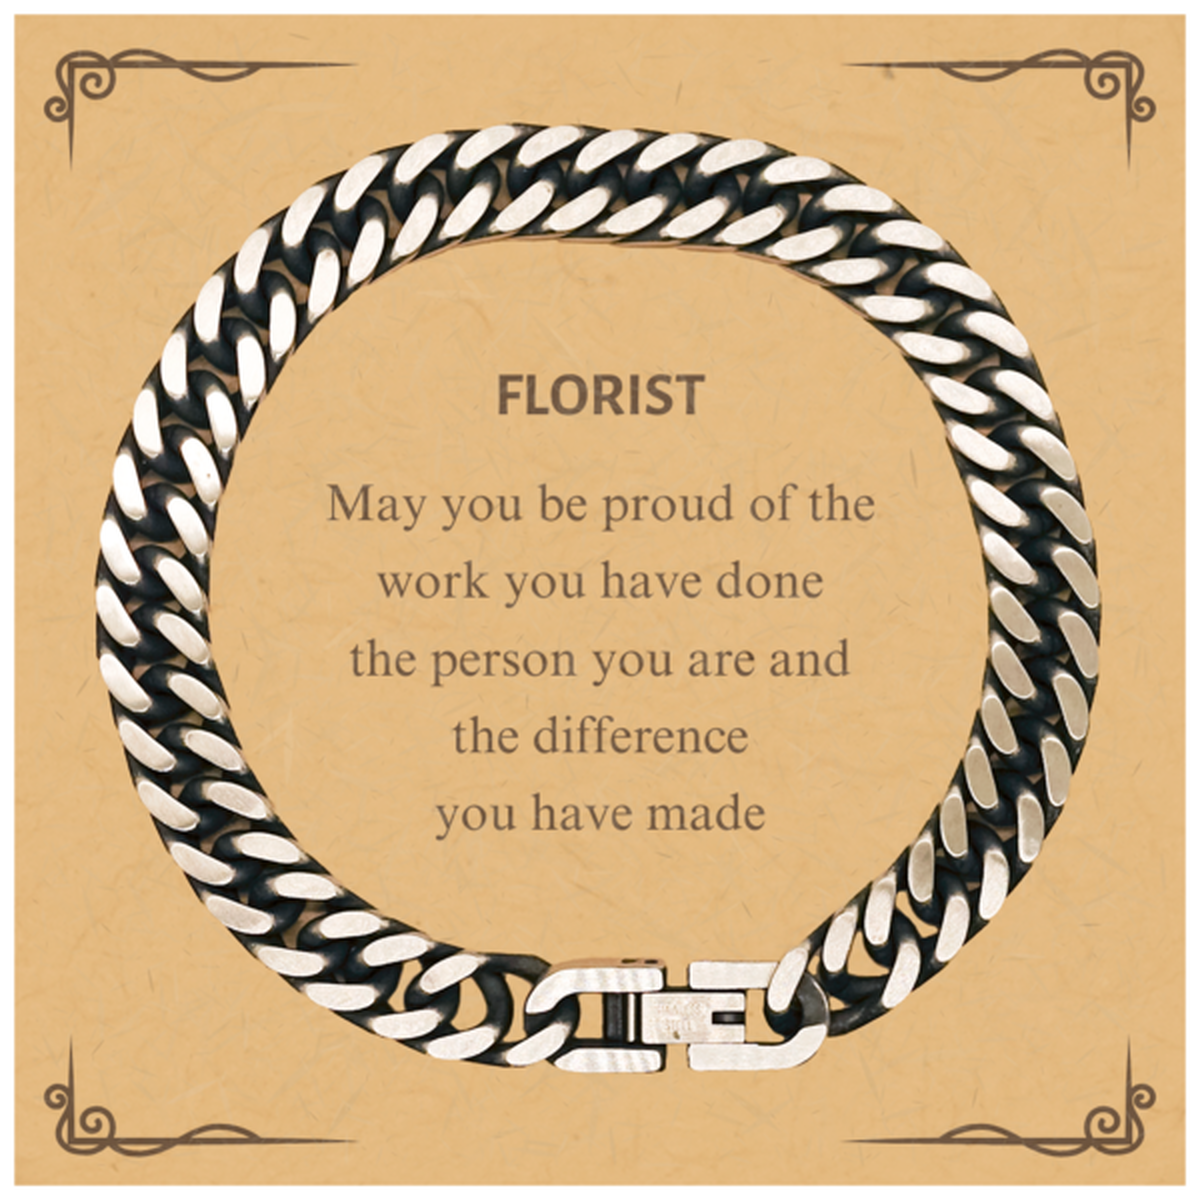 Florist May you be proud of the work you have done, Retirement Florist Cuban Link Chain Bracelet for Colleague Appreciation Gifts Amazing for Florist